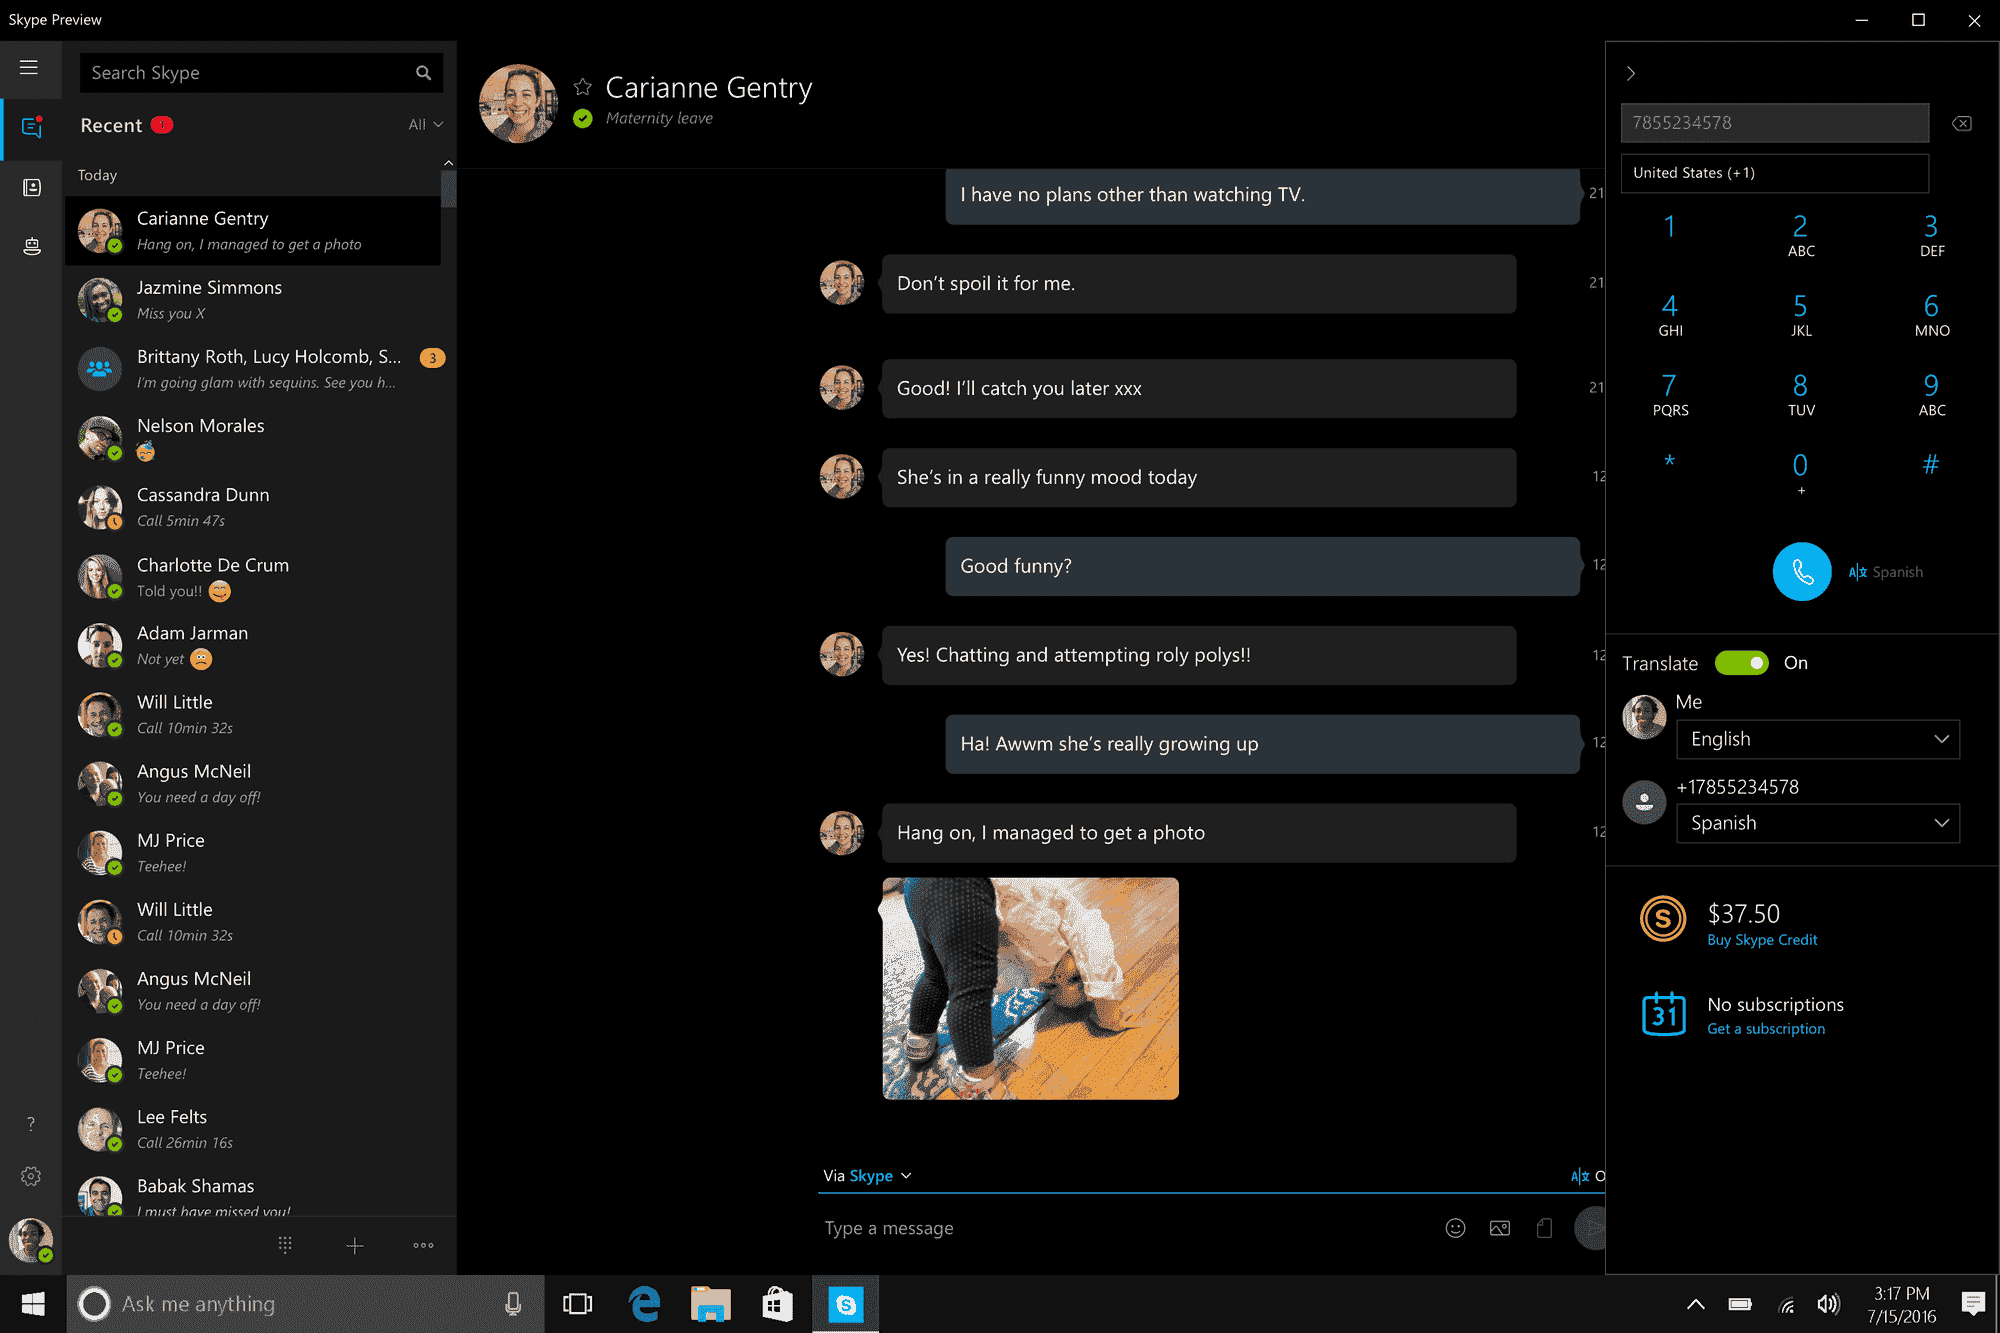 Skype Insider Preview app 8.29.76.16 adds Archive Conversations 9a3fe322-c0ad-4eff-9b69-360ed501a3d4.png?n=UWP%20Desktop%20PSTN%20translation.png